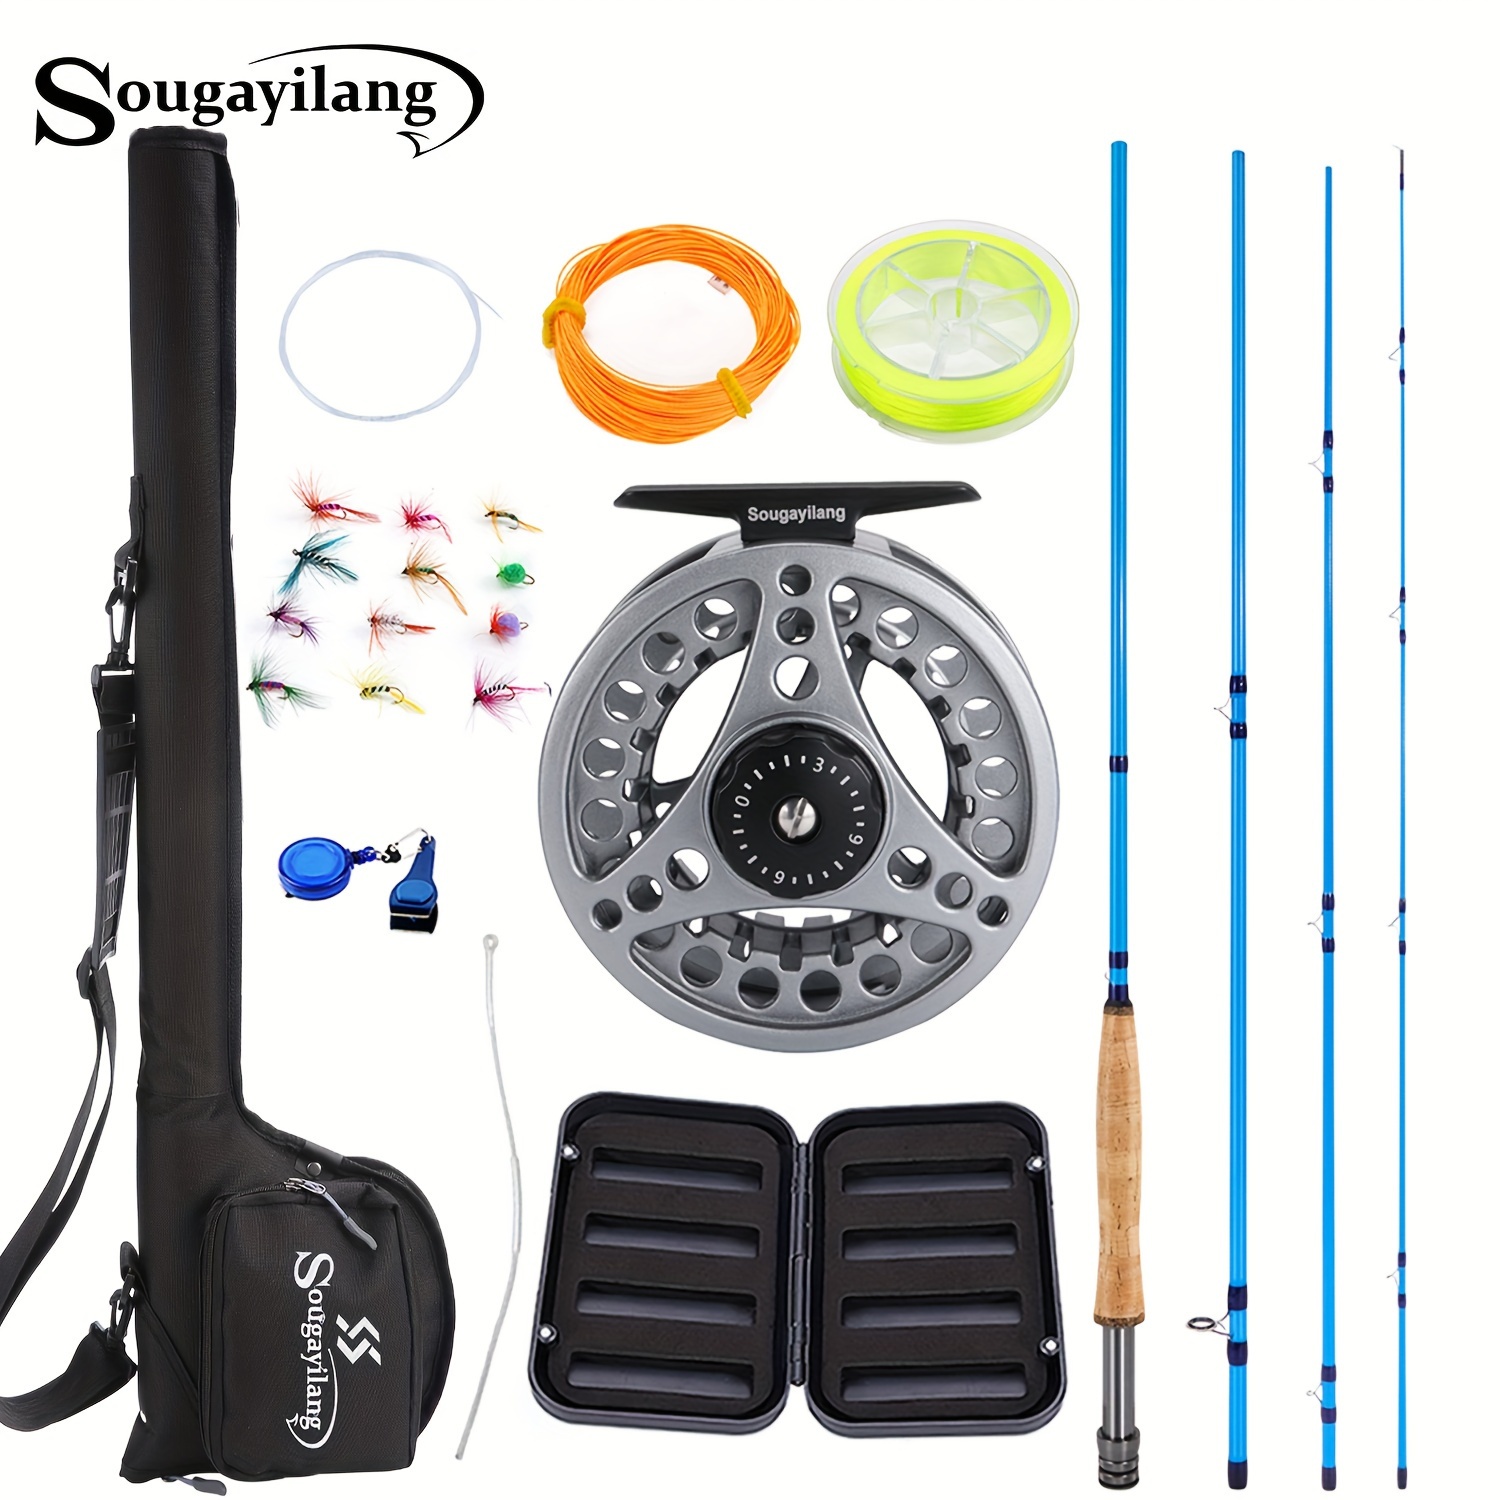 Sougayilang Fishing Rod And Reel Combo, 2 Sections Ultralight Carbon  Casting Fishing Rod, 7.2:1 Gear Ratio Fishing Reel For Spring Perch Trout  Pike